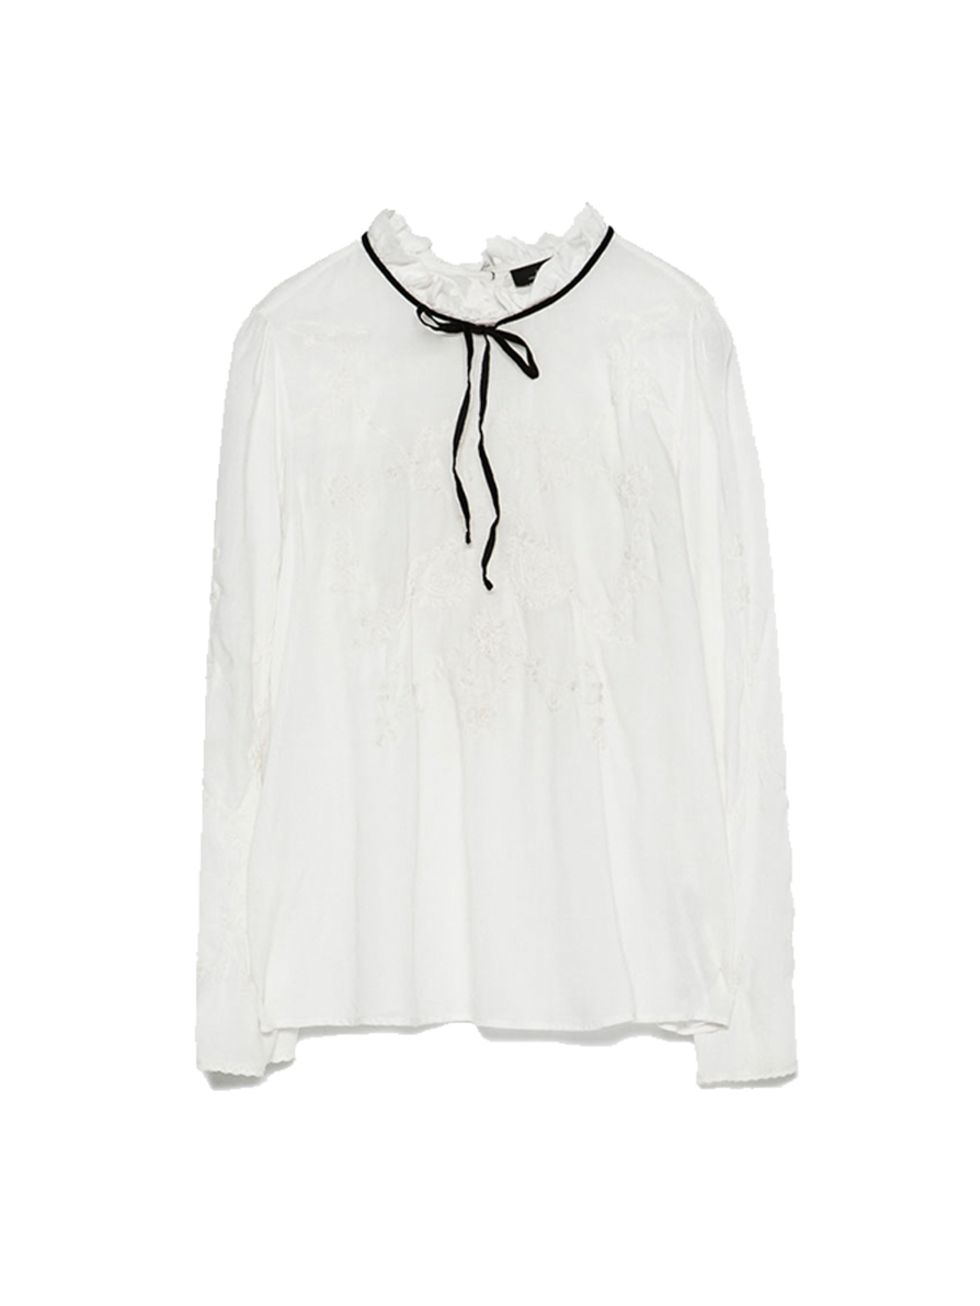 <p><a href="http://www.zara.com/uk/en/collection-ss15/woman/shirts/tie-neck-embroidered-blouse-c358004p2409043.html" target="_blank">Zara</a> white shirt, £29.99</p>